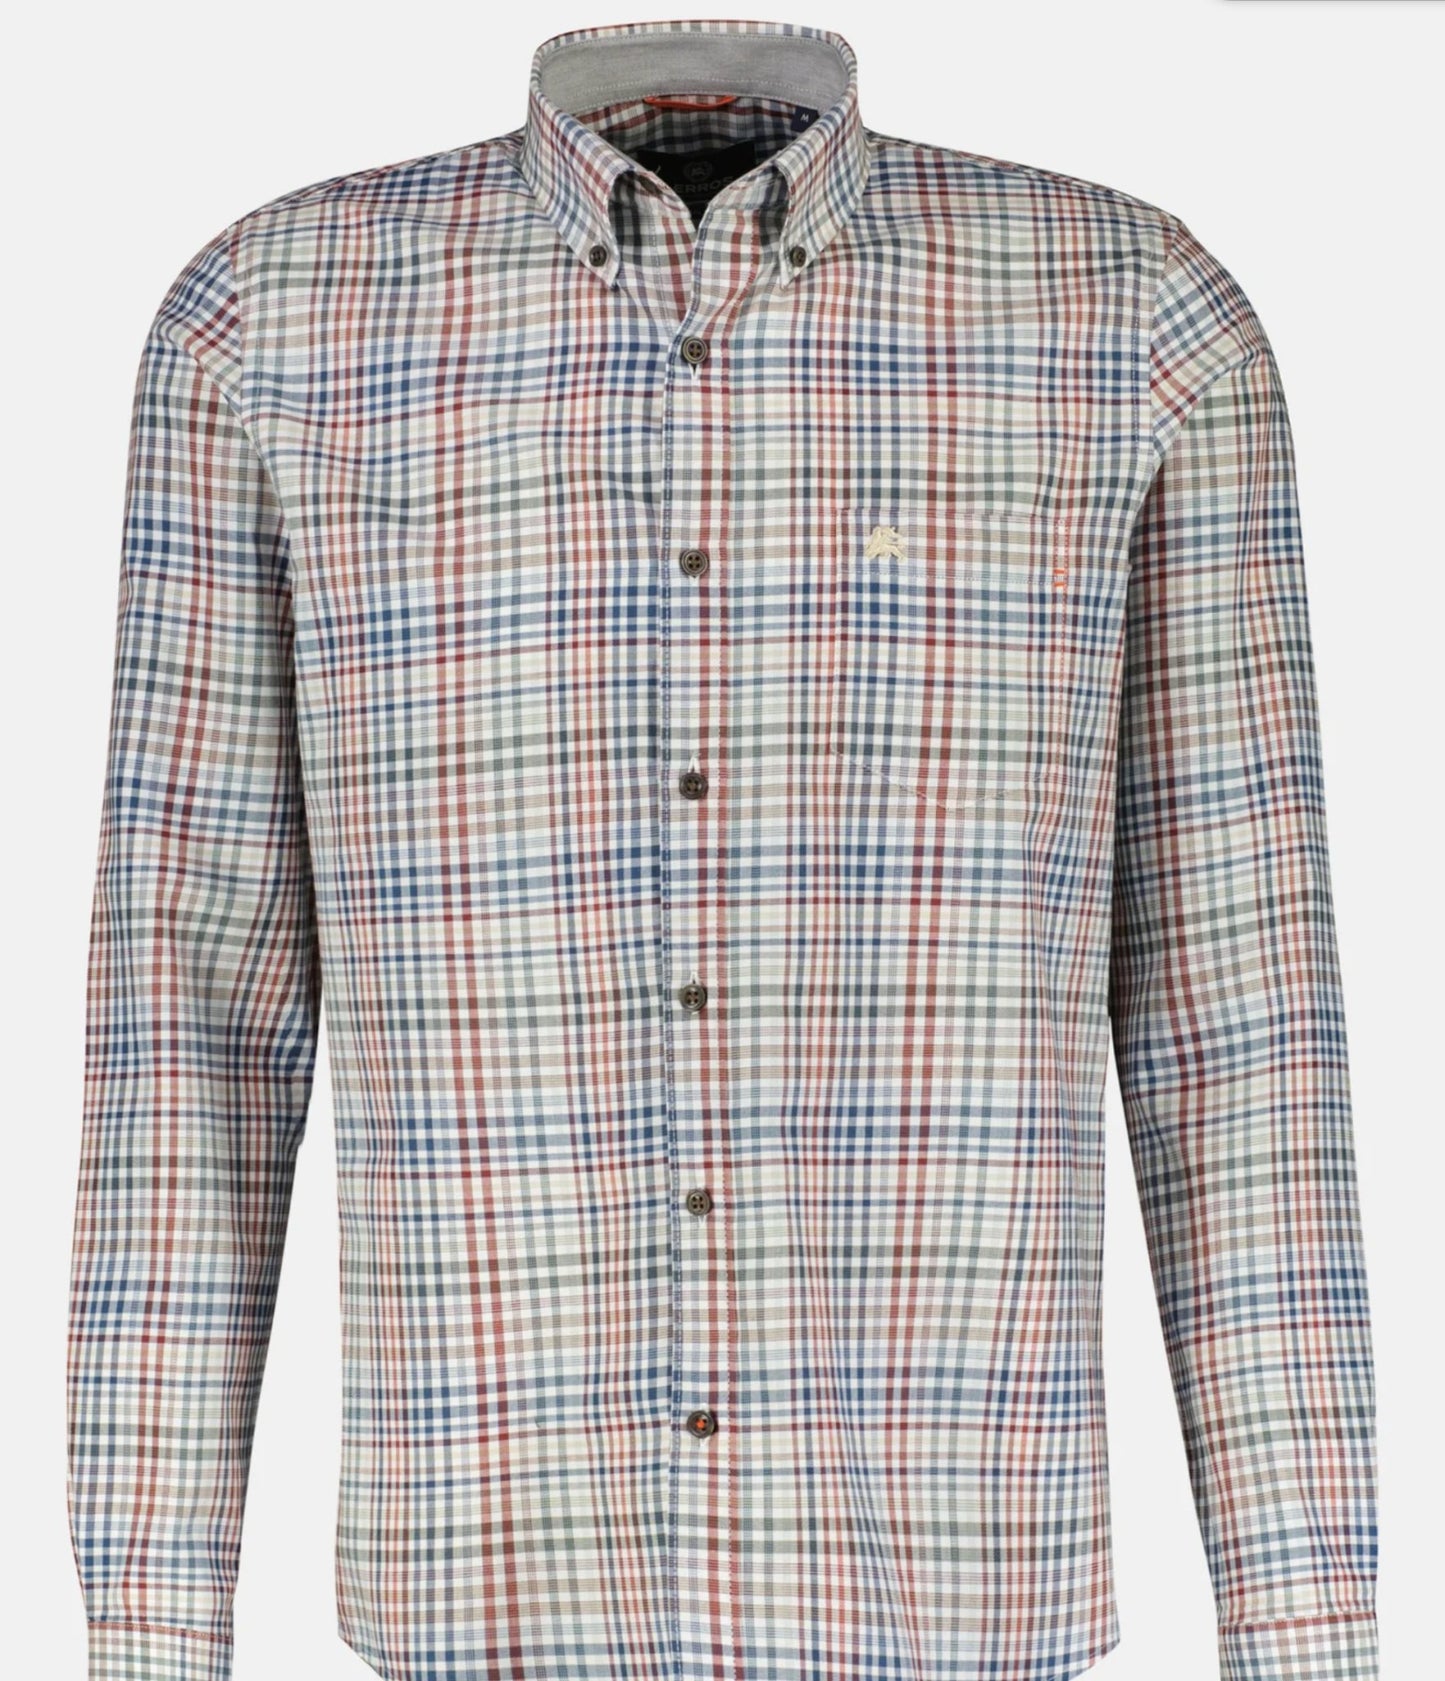 Small Check Button Down Shirt - White - GLS Clothing